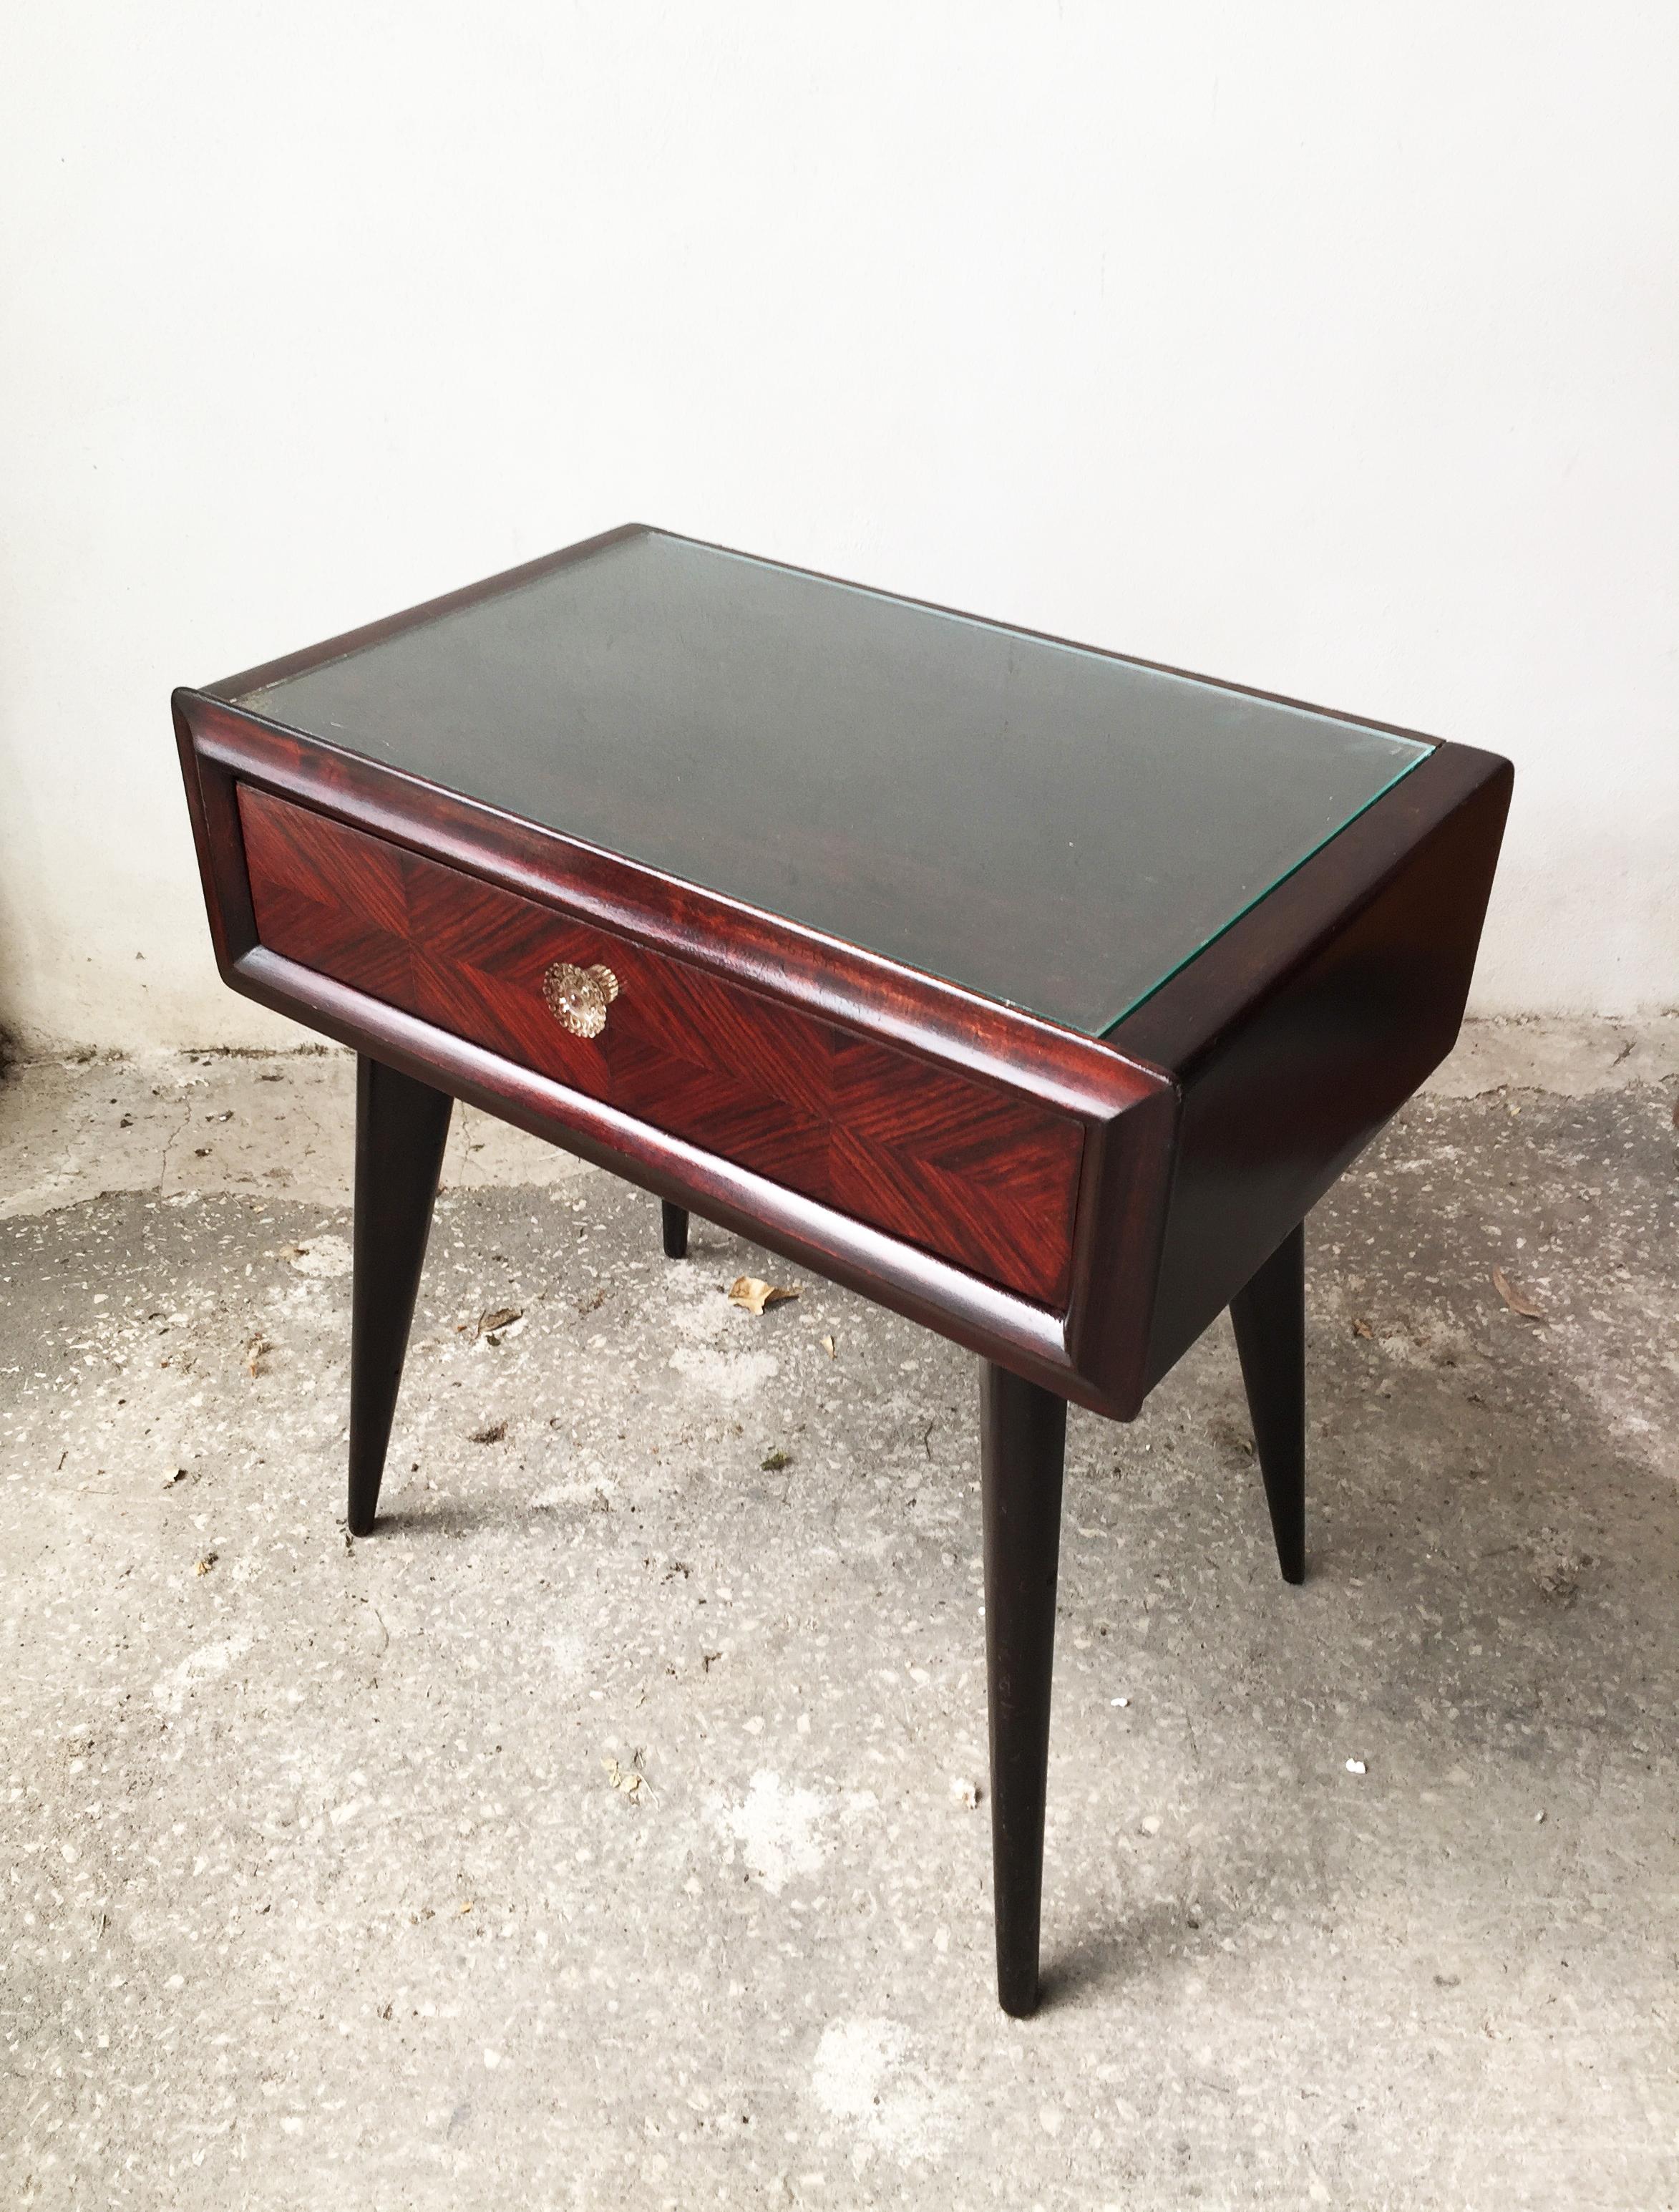 Scandinavian Nightstand in Mahogany Wood & Clear Glass on Top with drawer, 1950 im Zustand „Gut“ im Angebot in Fregene, IT